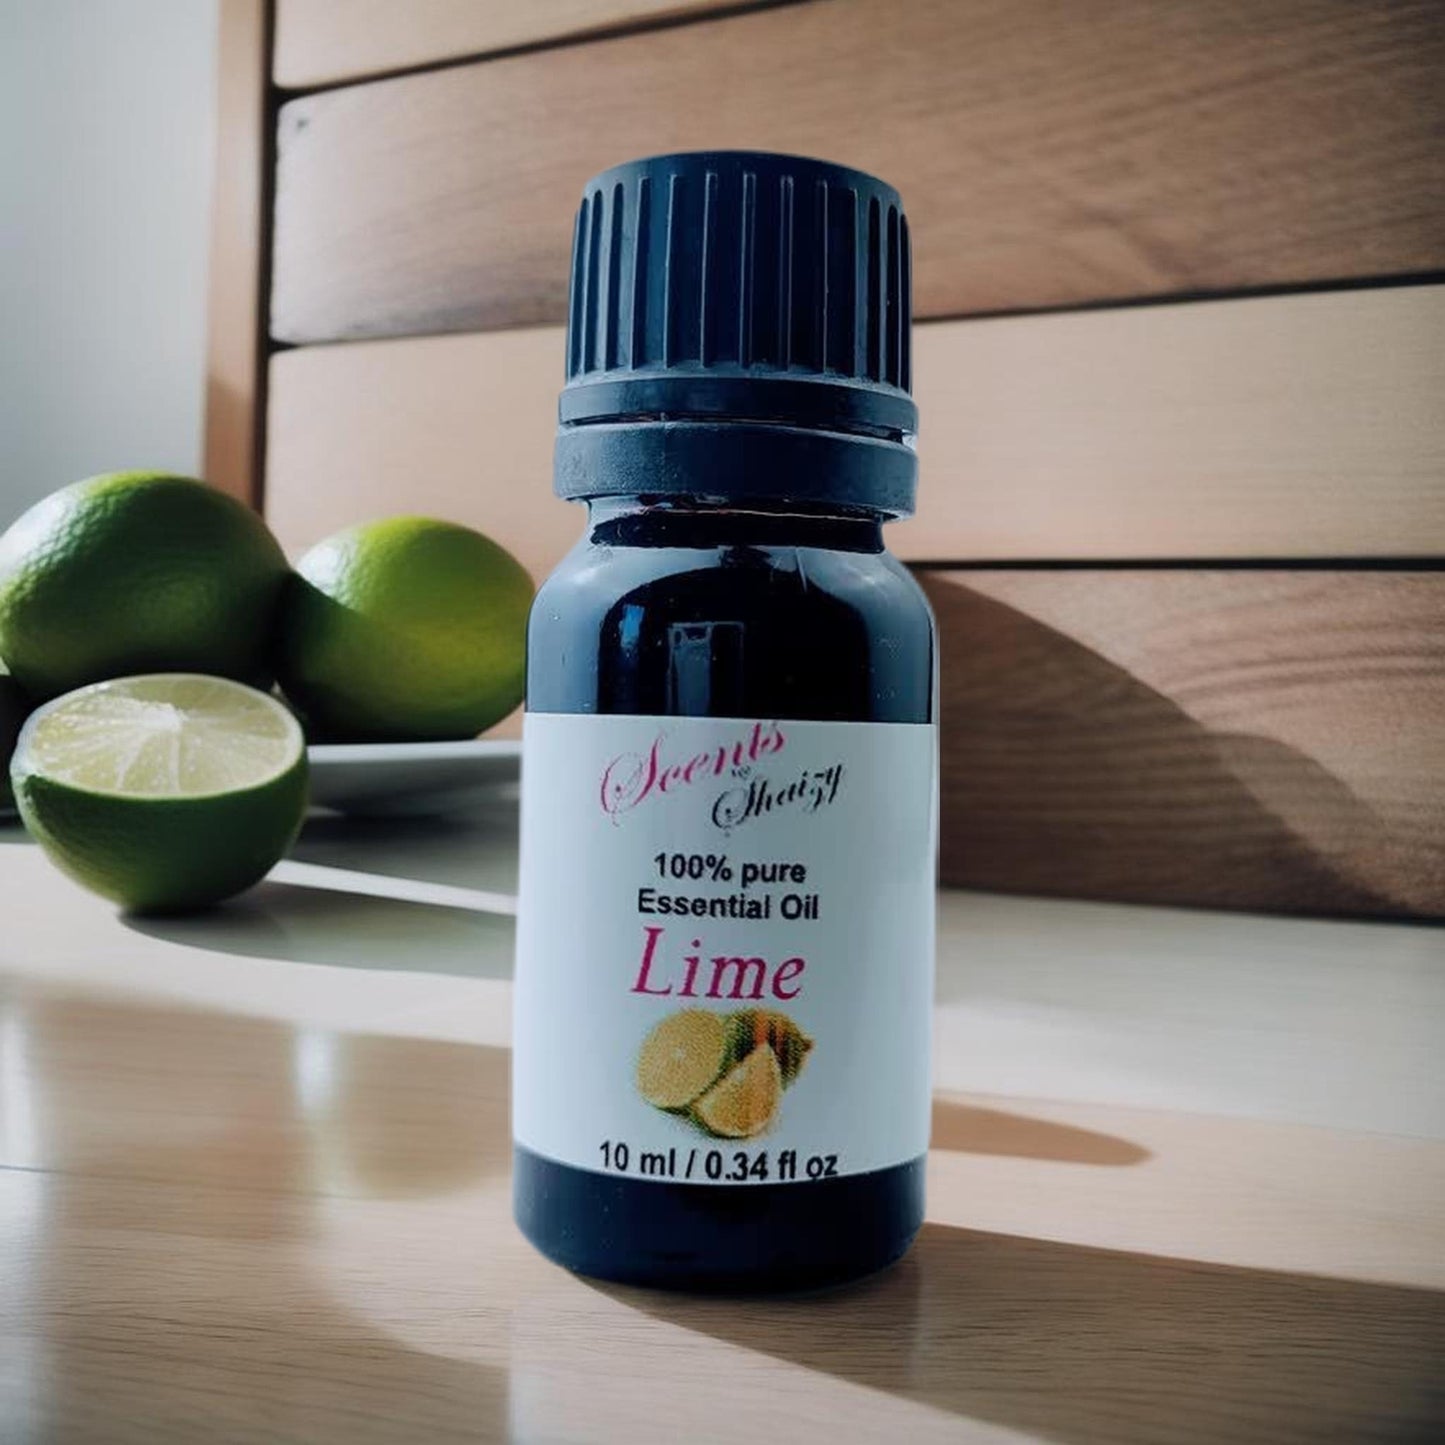 Lime Oils | All Natural